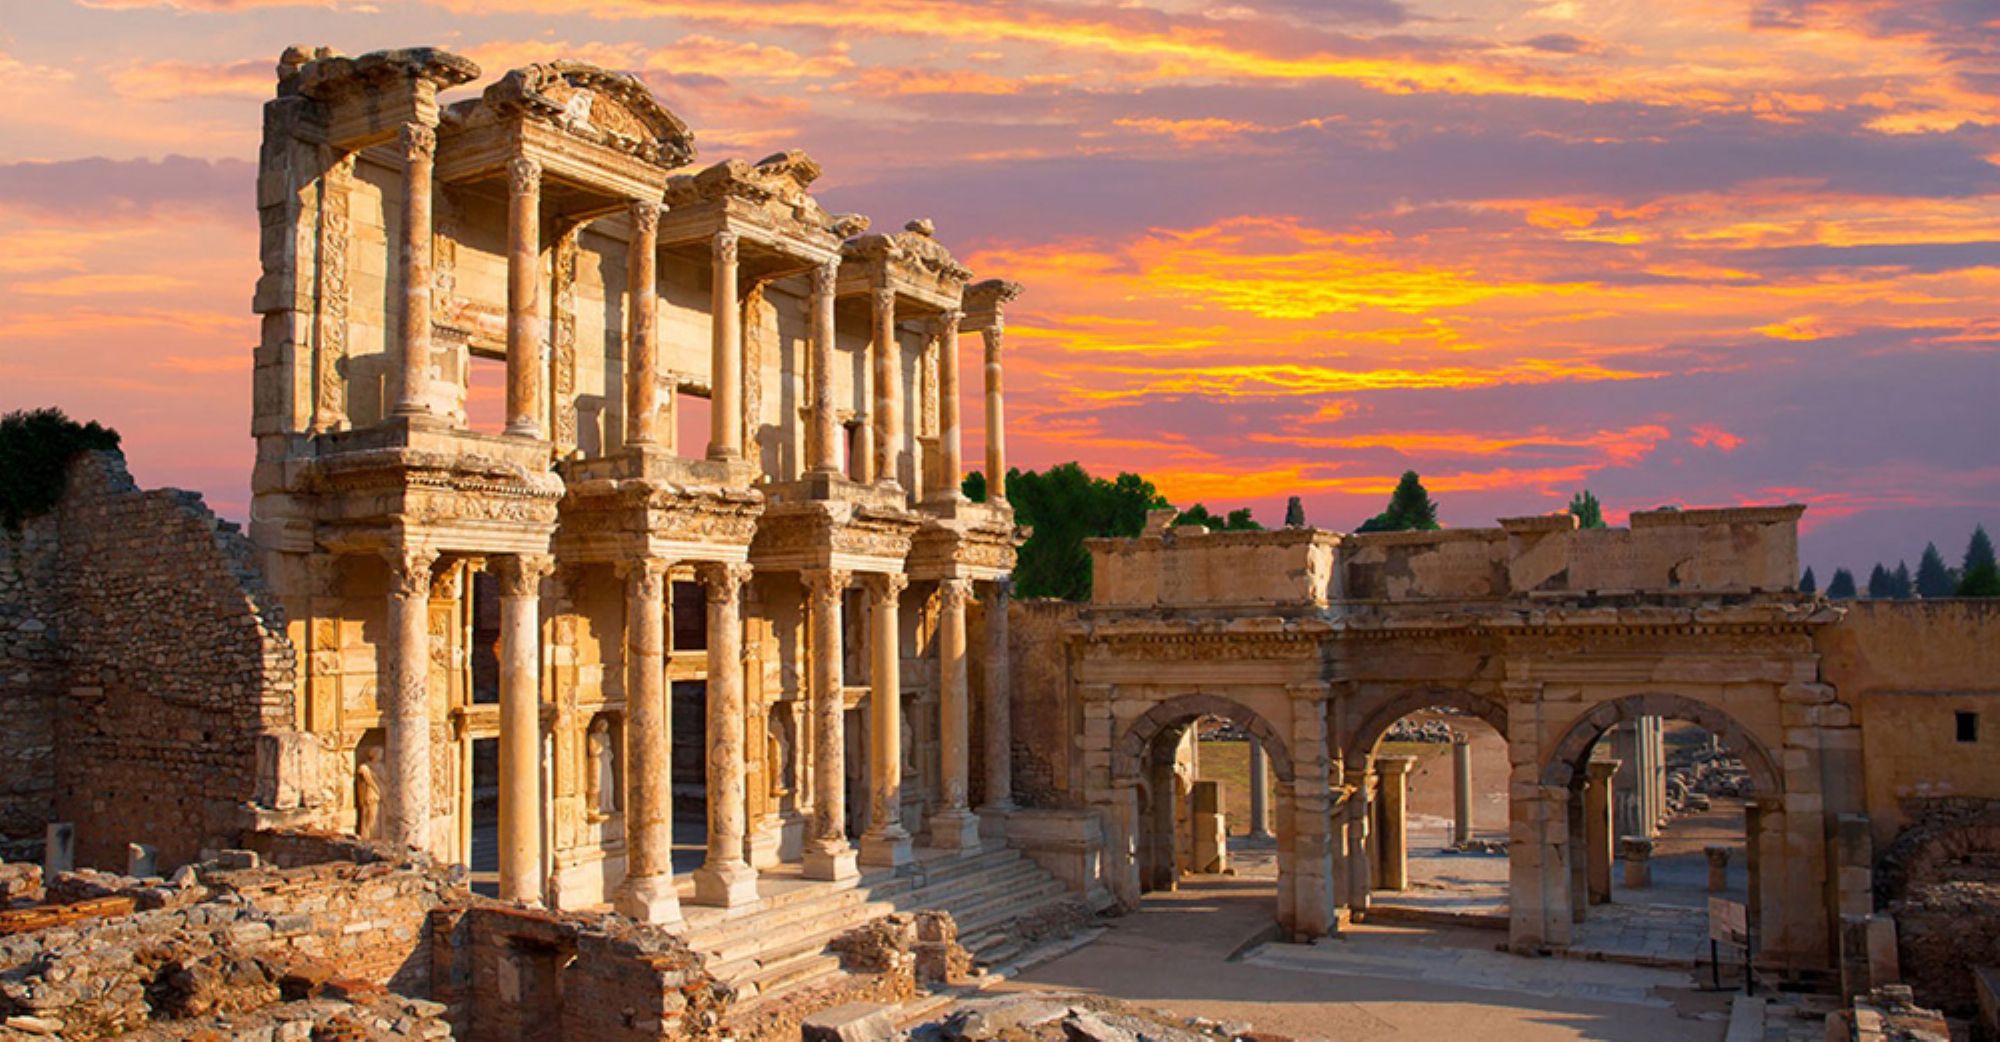 Ephesus Day Trip from Istanbul by Plane